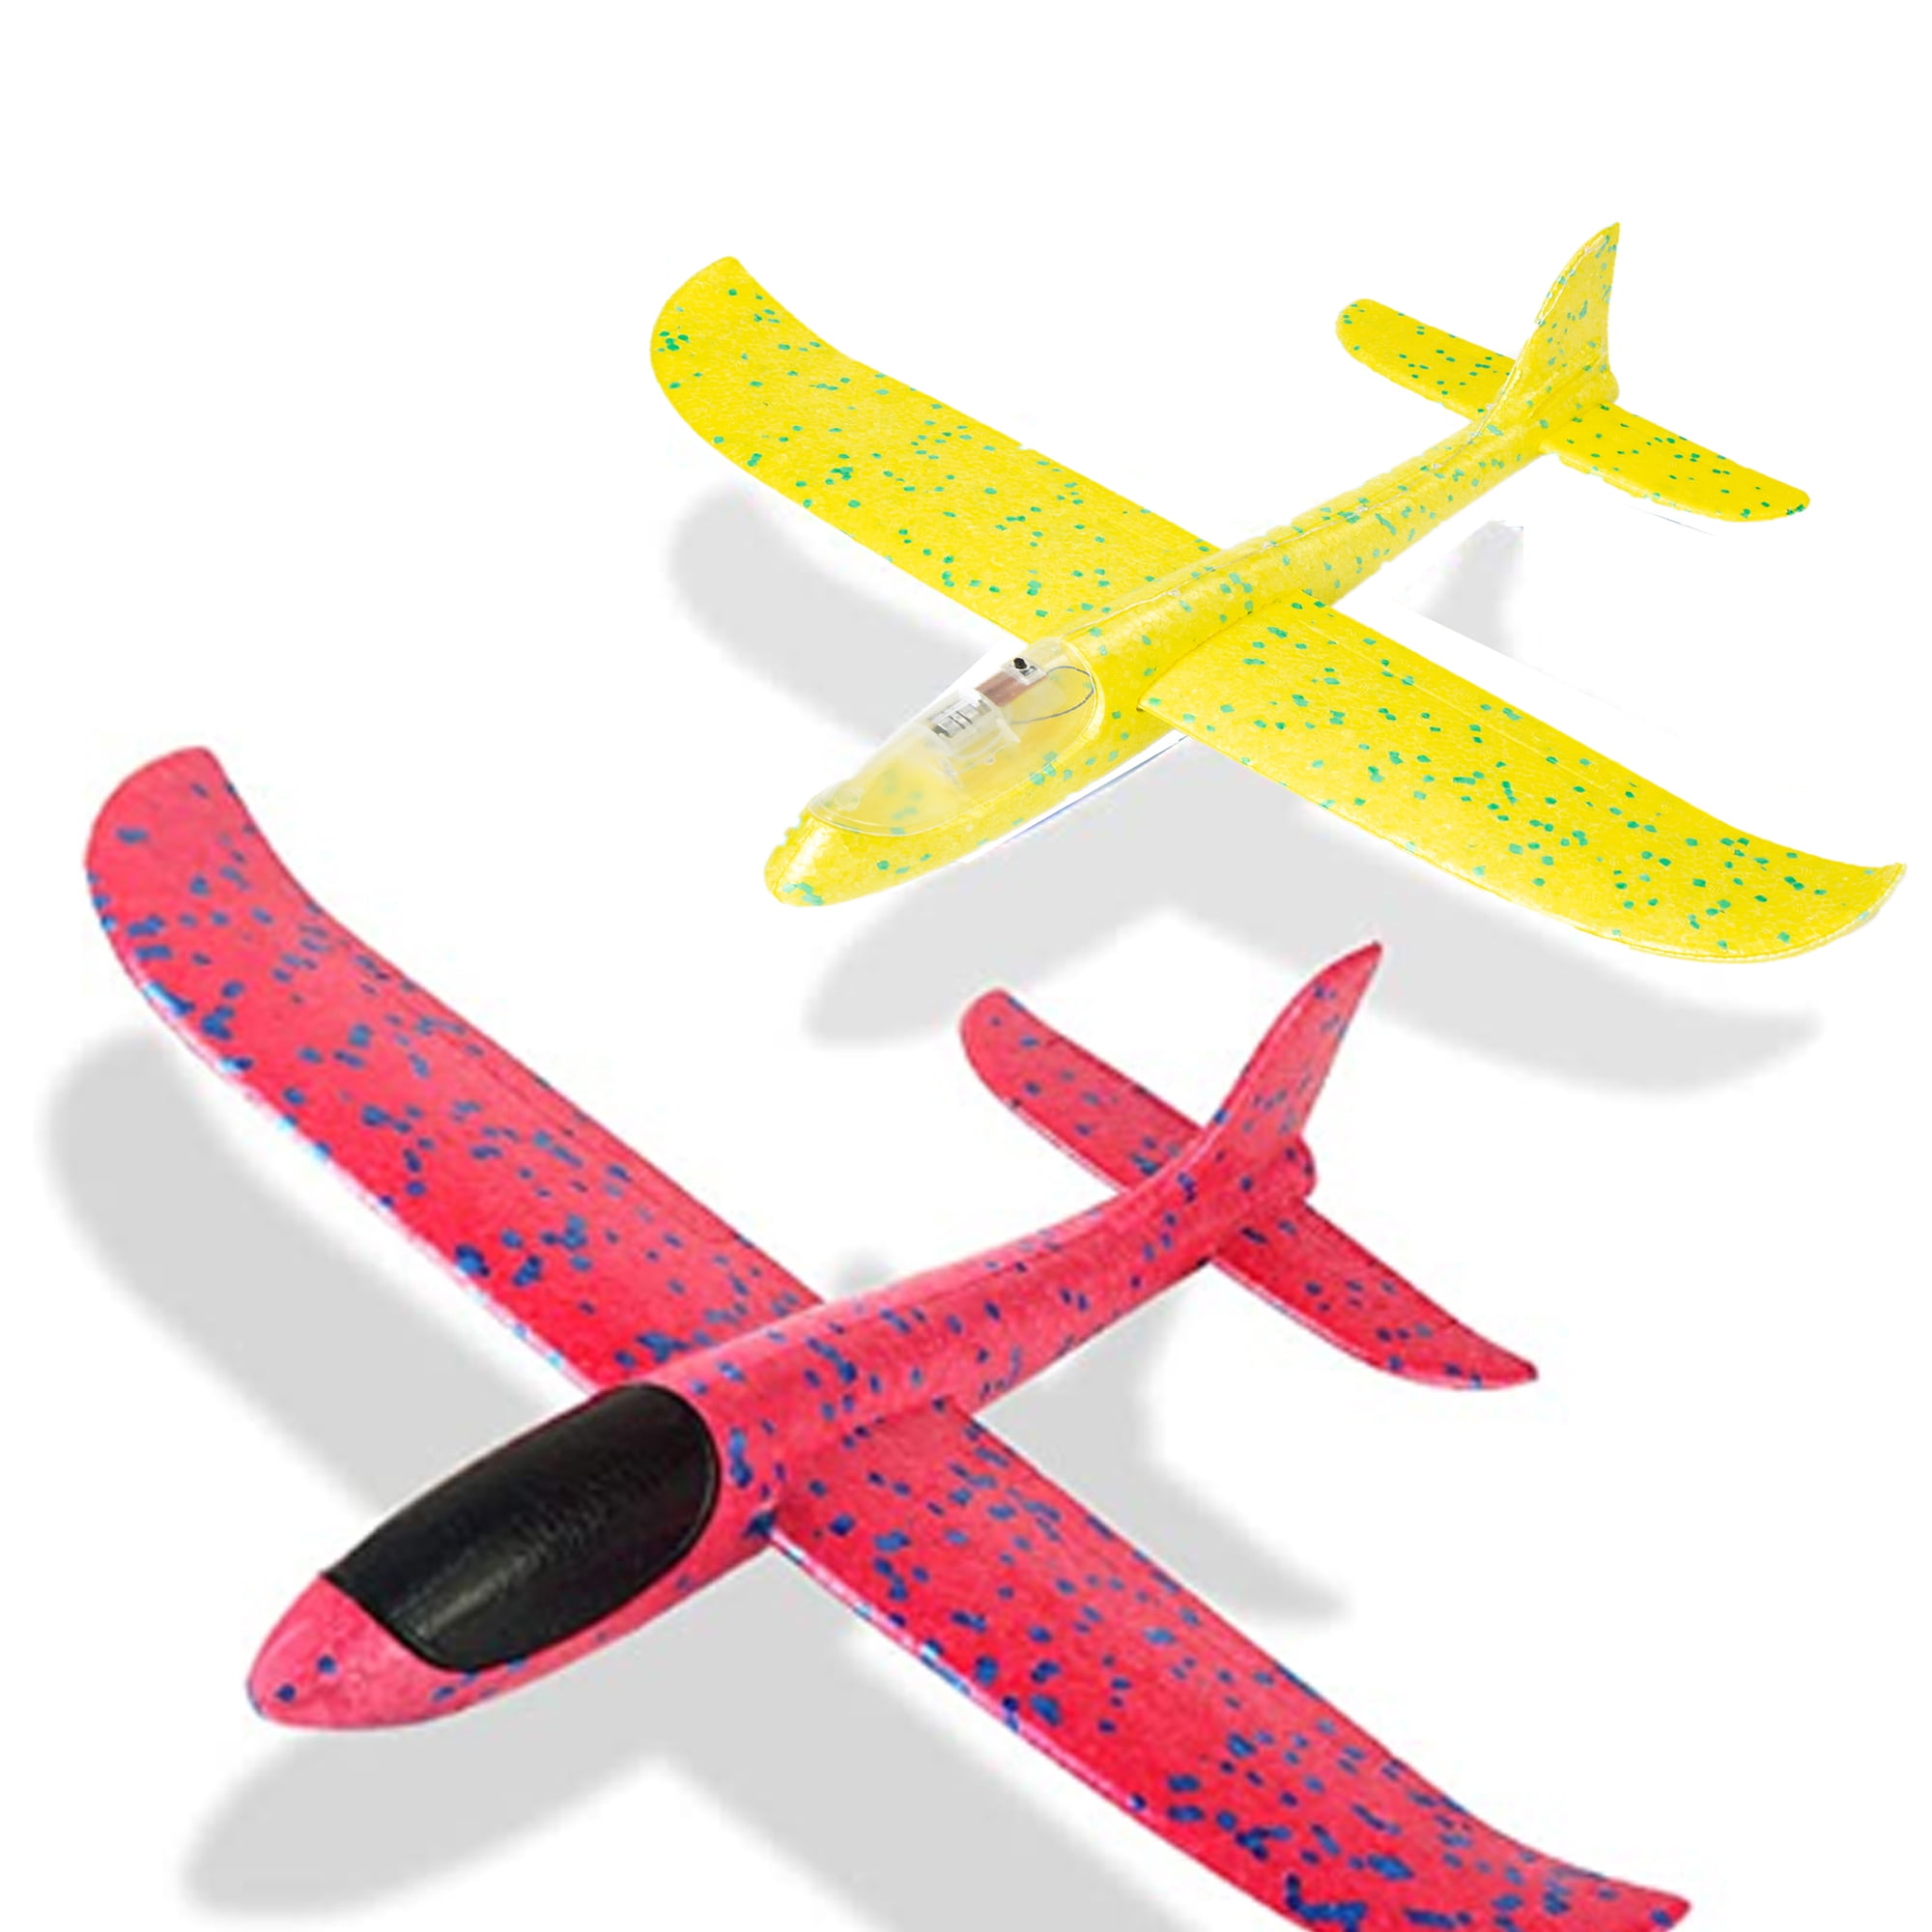 Foam Hand Launch Throwing Glider Outdoor Plane Flying Model Aircraft Kids Gift 